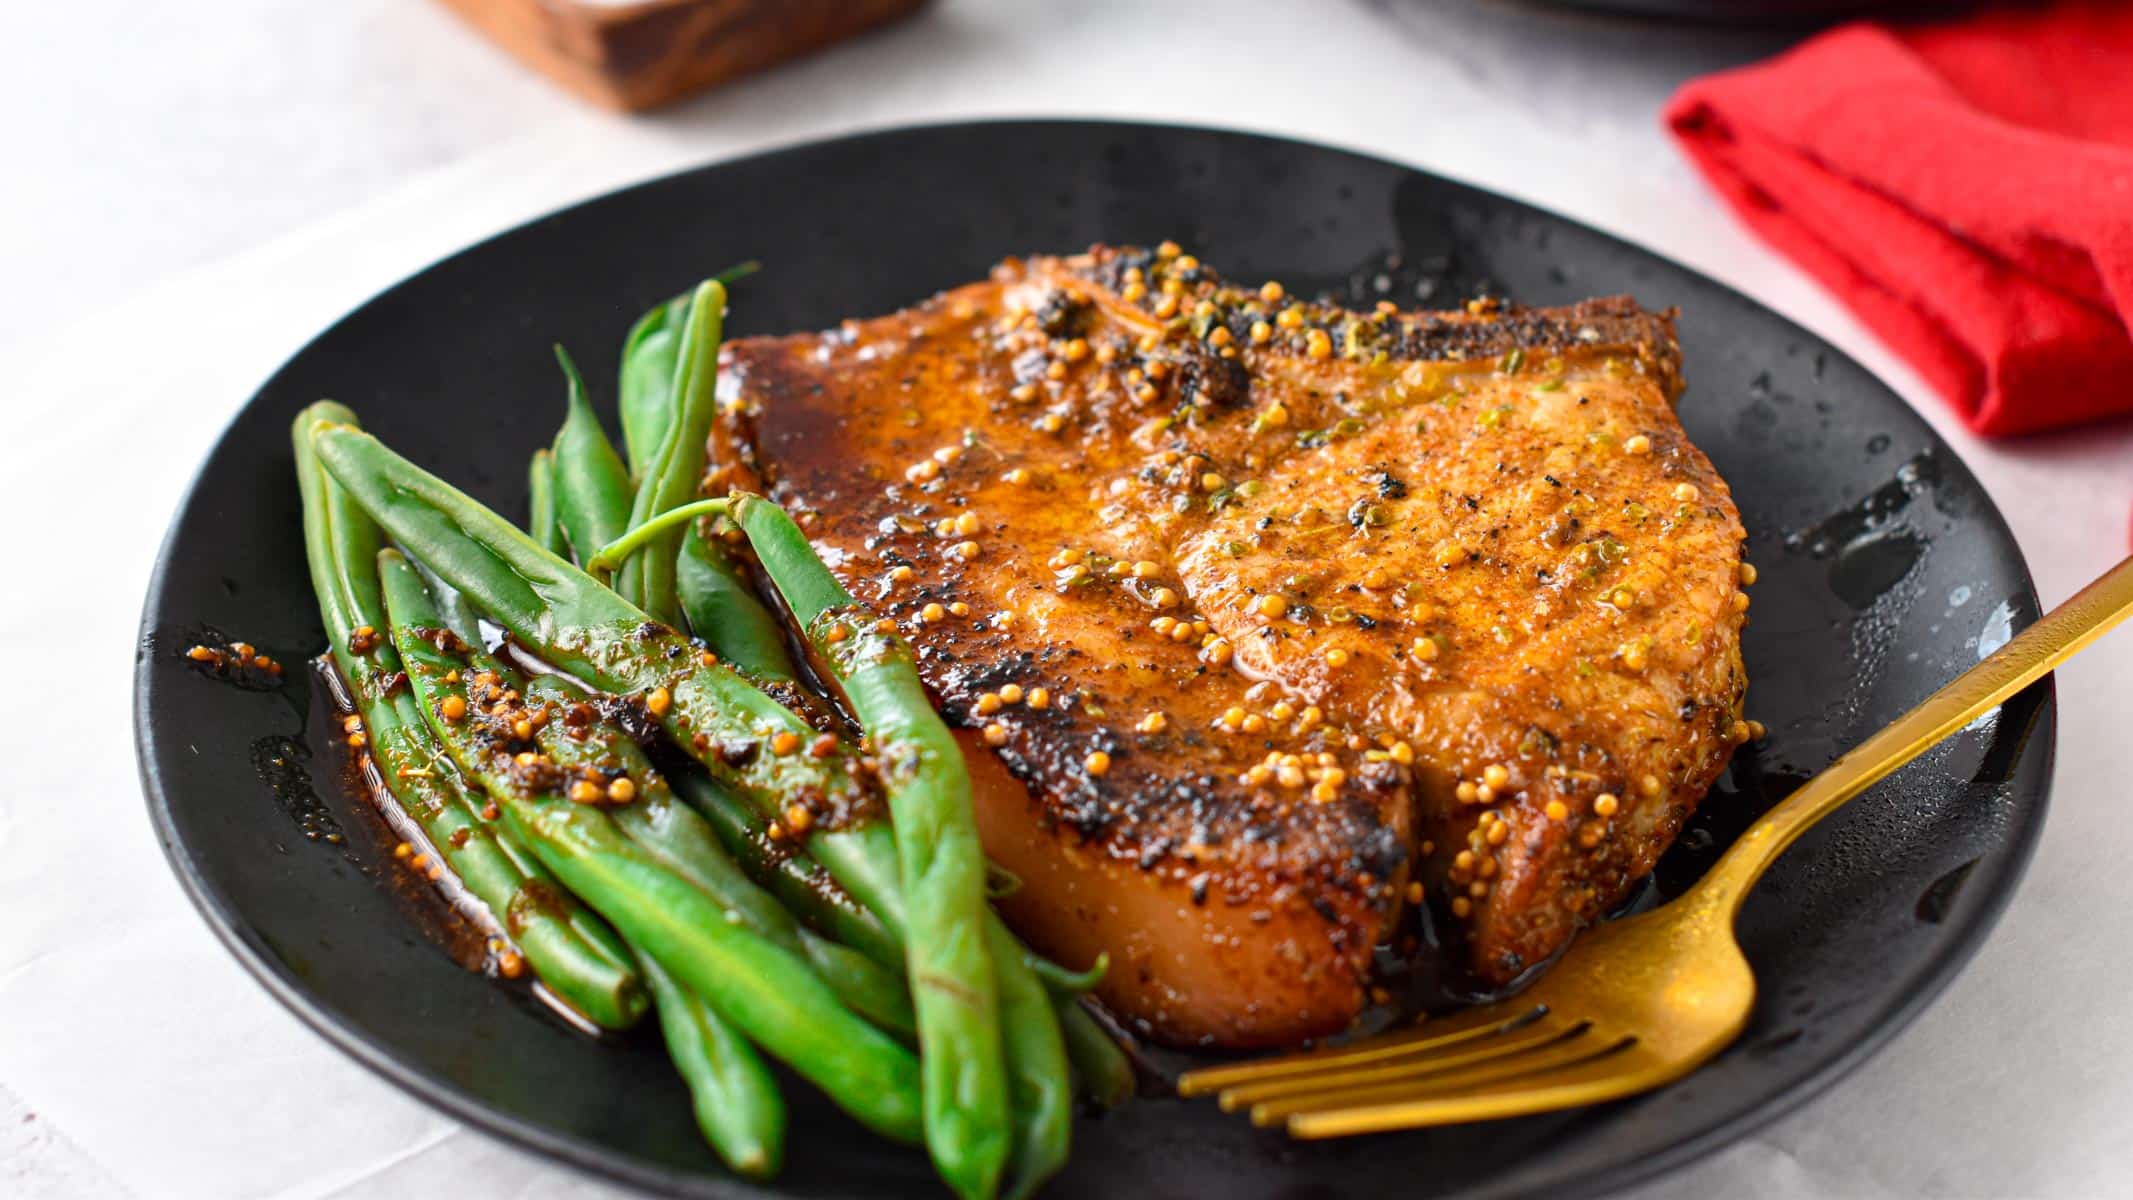 a plate with a broiled pork chop and green beans on the side